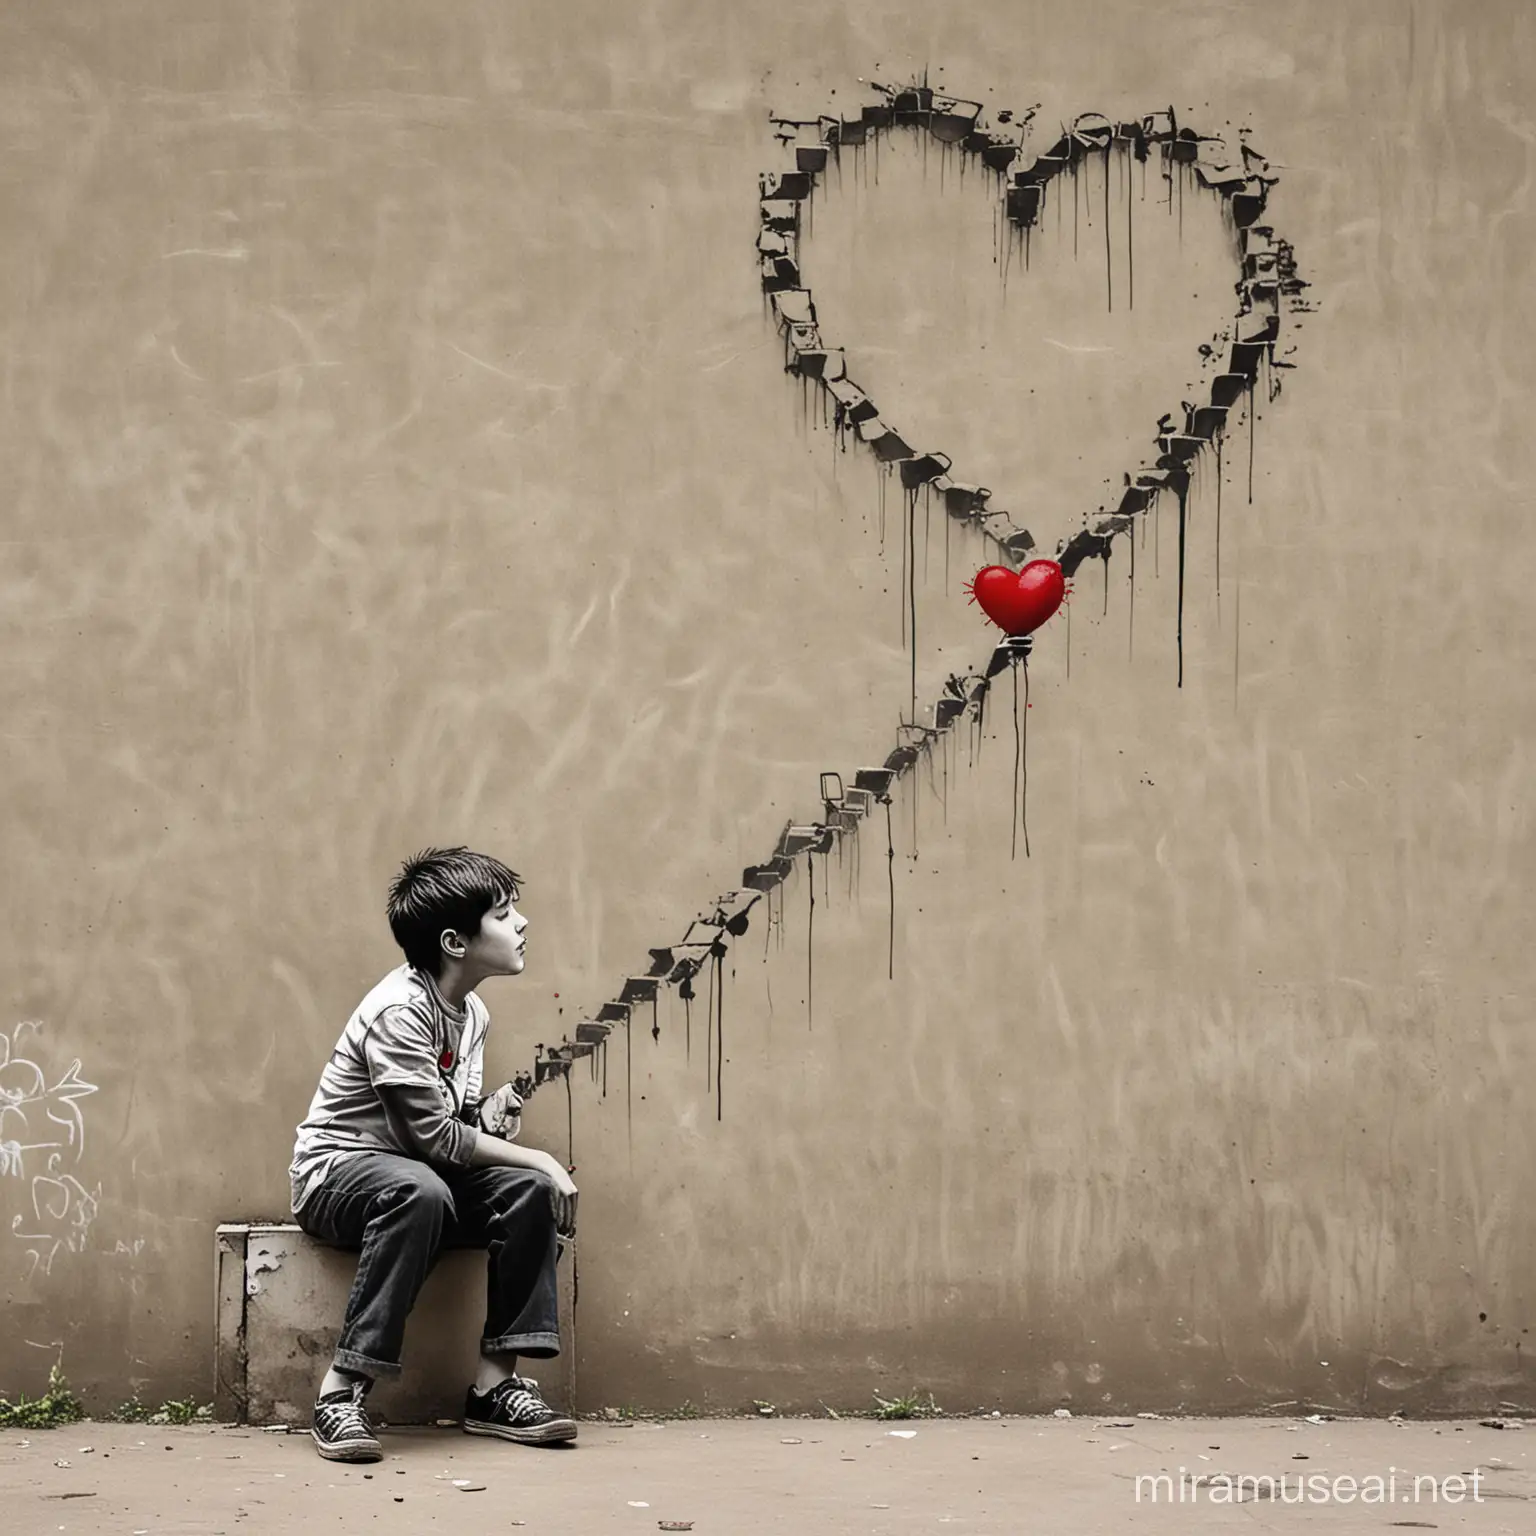 Boy dreaming about the heart, Banksy style